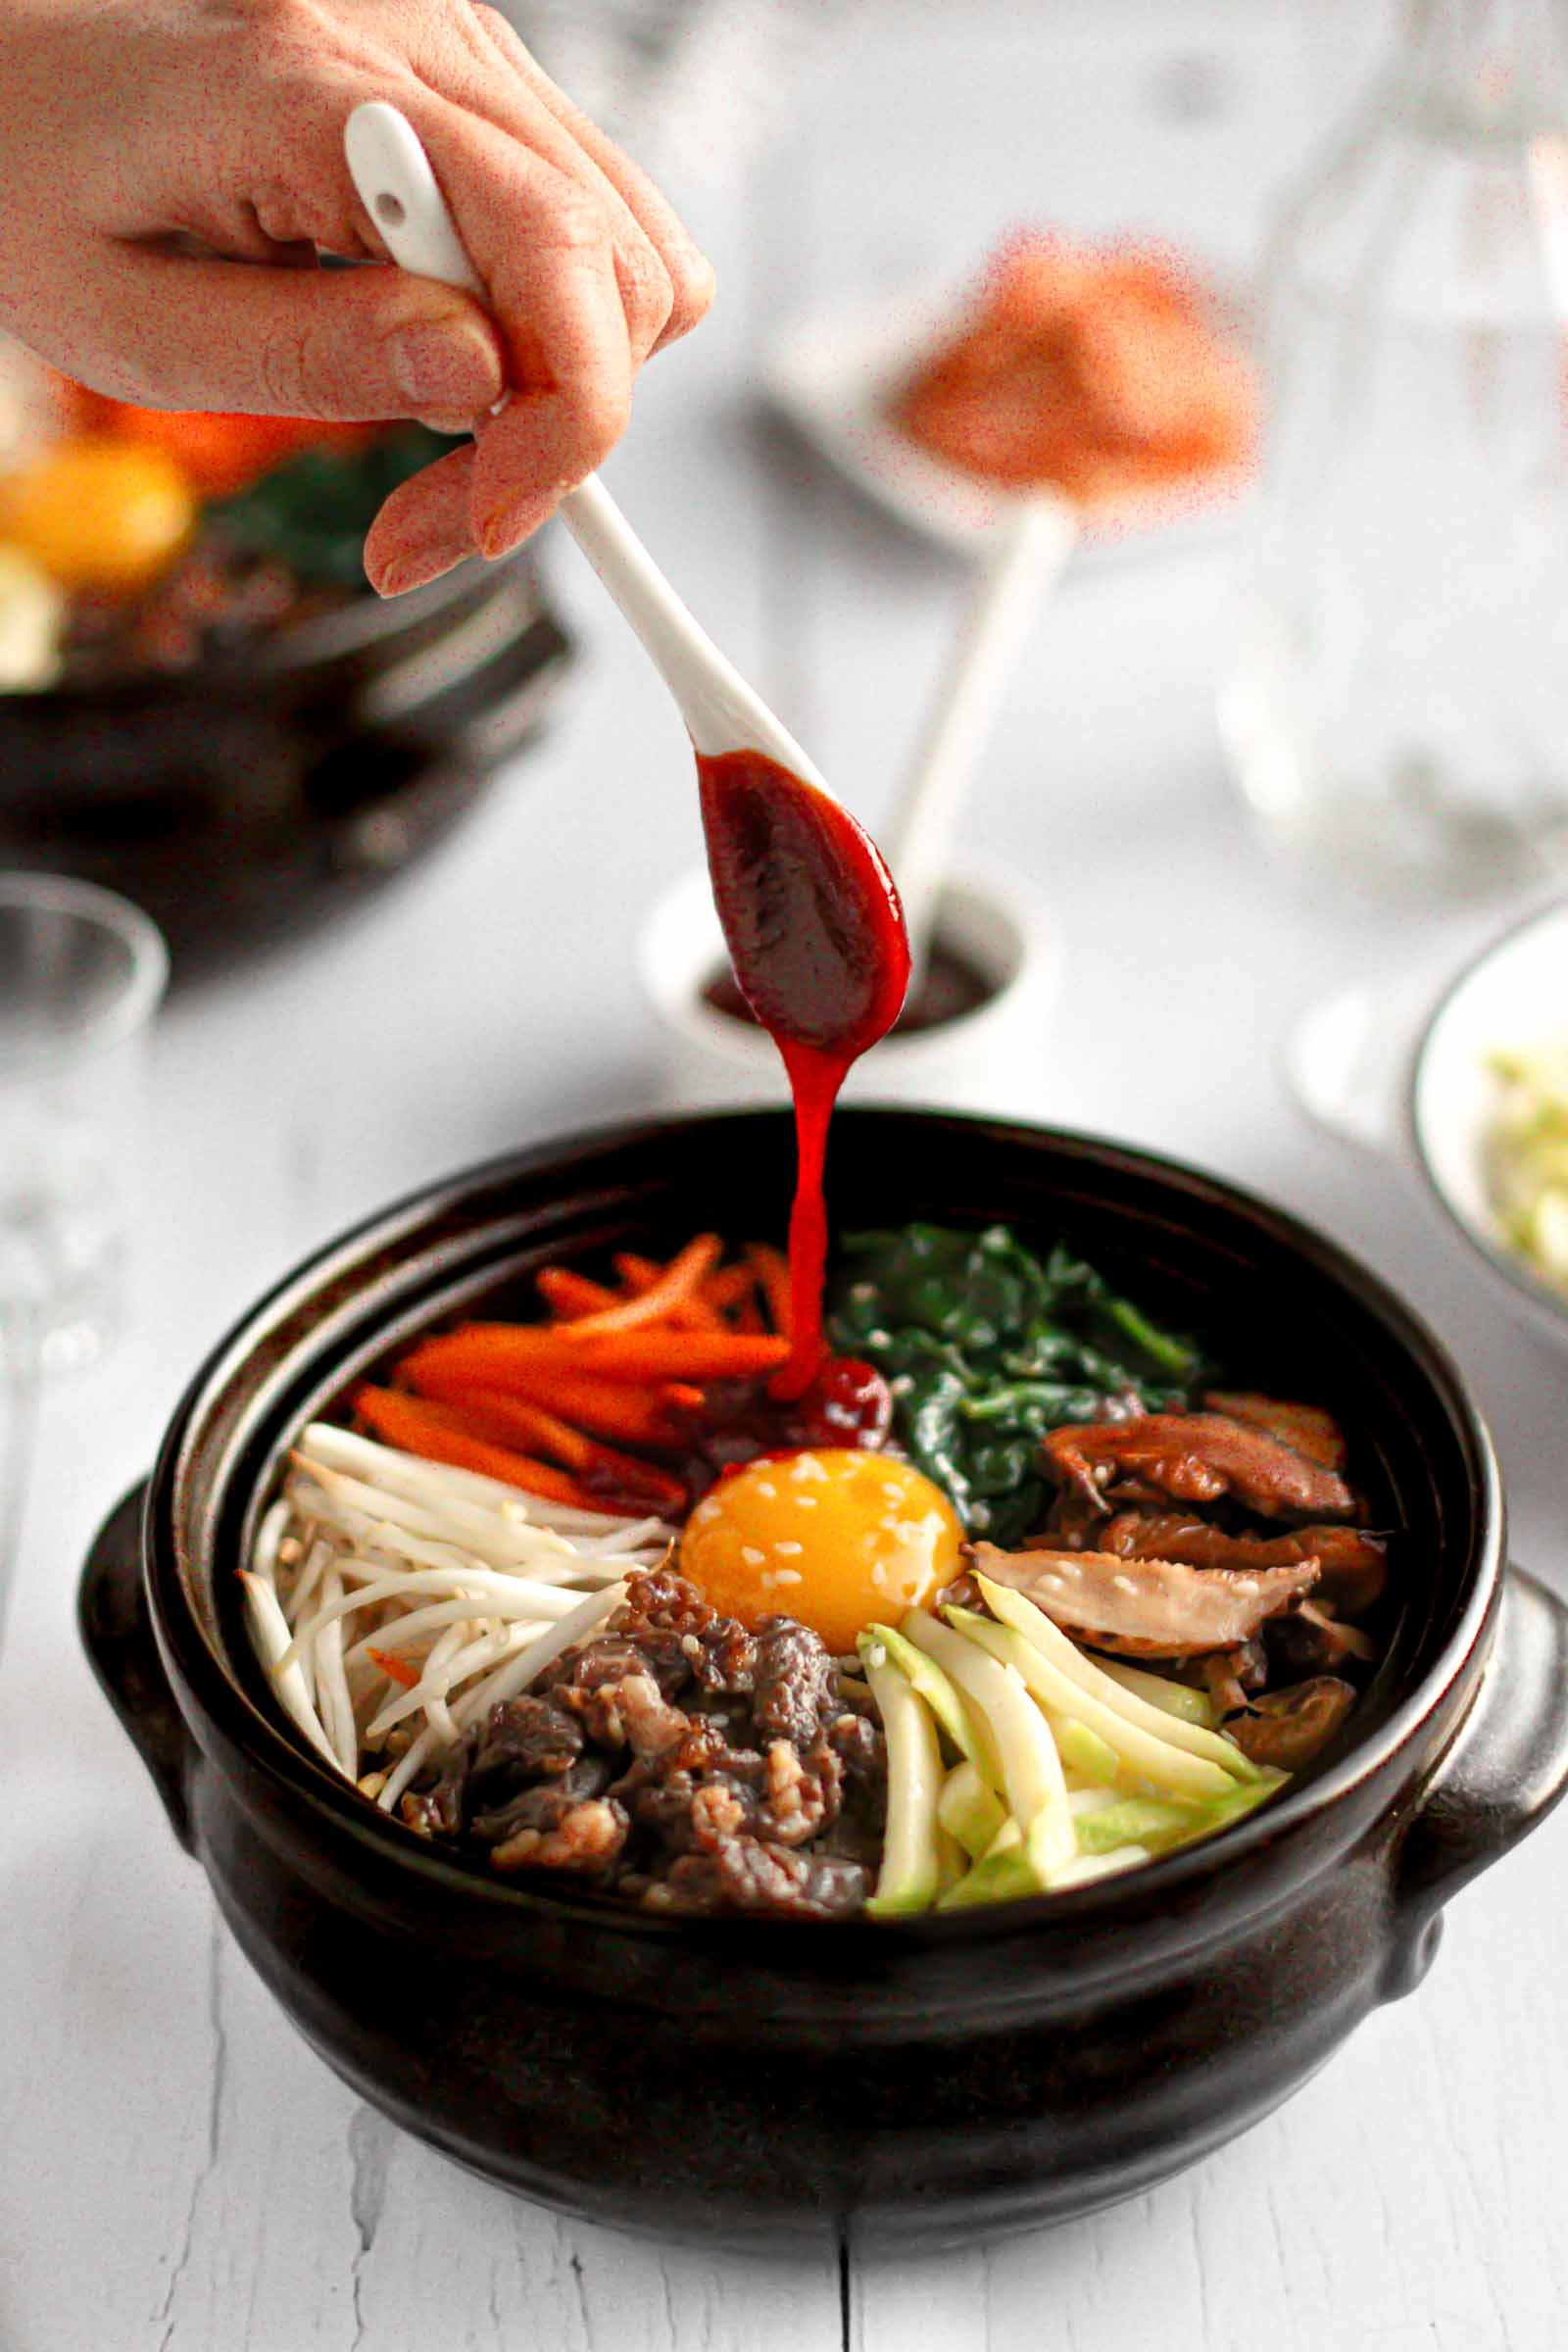 Dolsot bibimbap composed of rice, marinated beef, seasoned vegetables, one egg. sauce made out of gochujang.